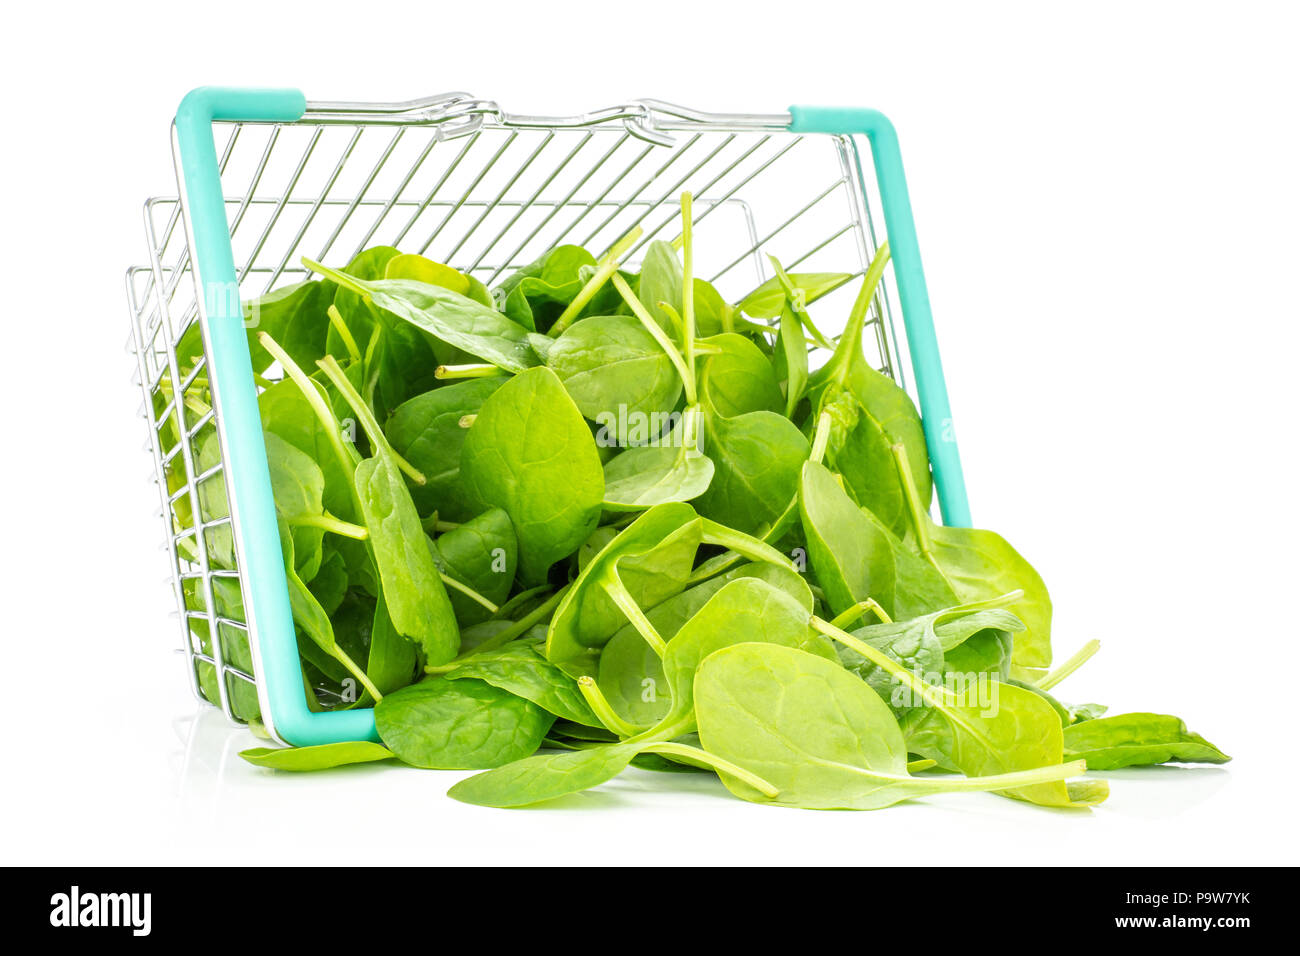 Fresh baby spinach leaves out a shopping basket isolated on white background Stock Photo